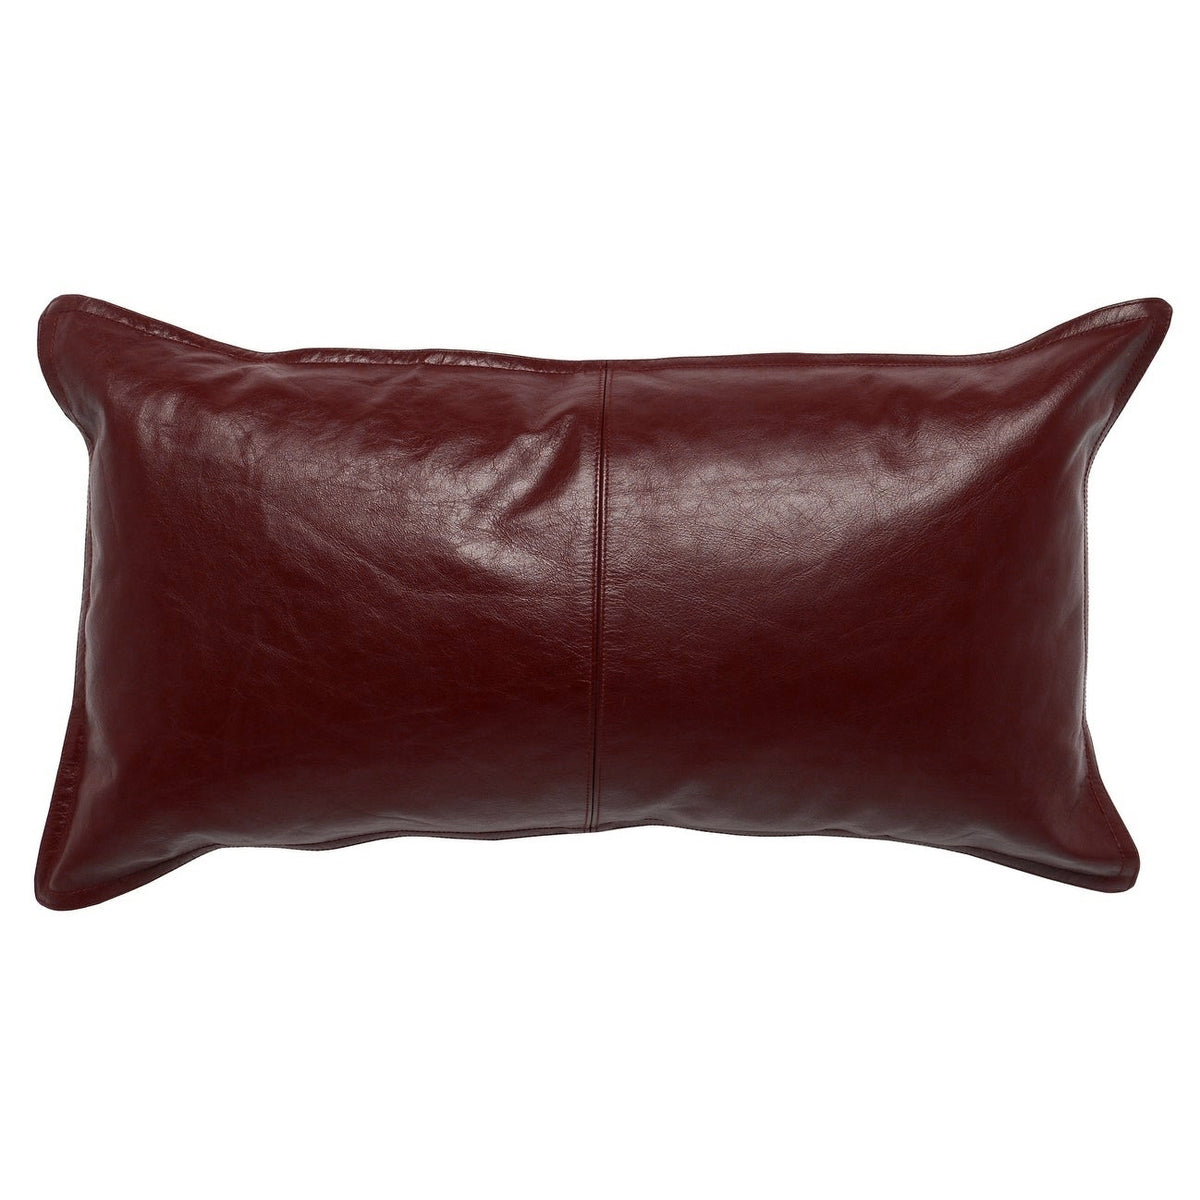 Genuine Leather Rectangle Pillow Cover 09 SkinOutfit